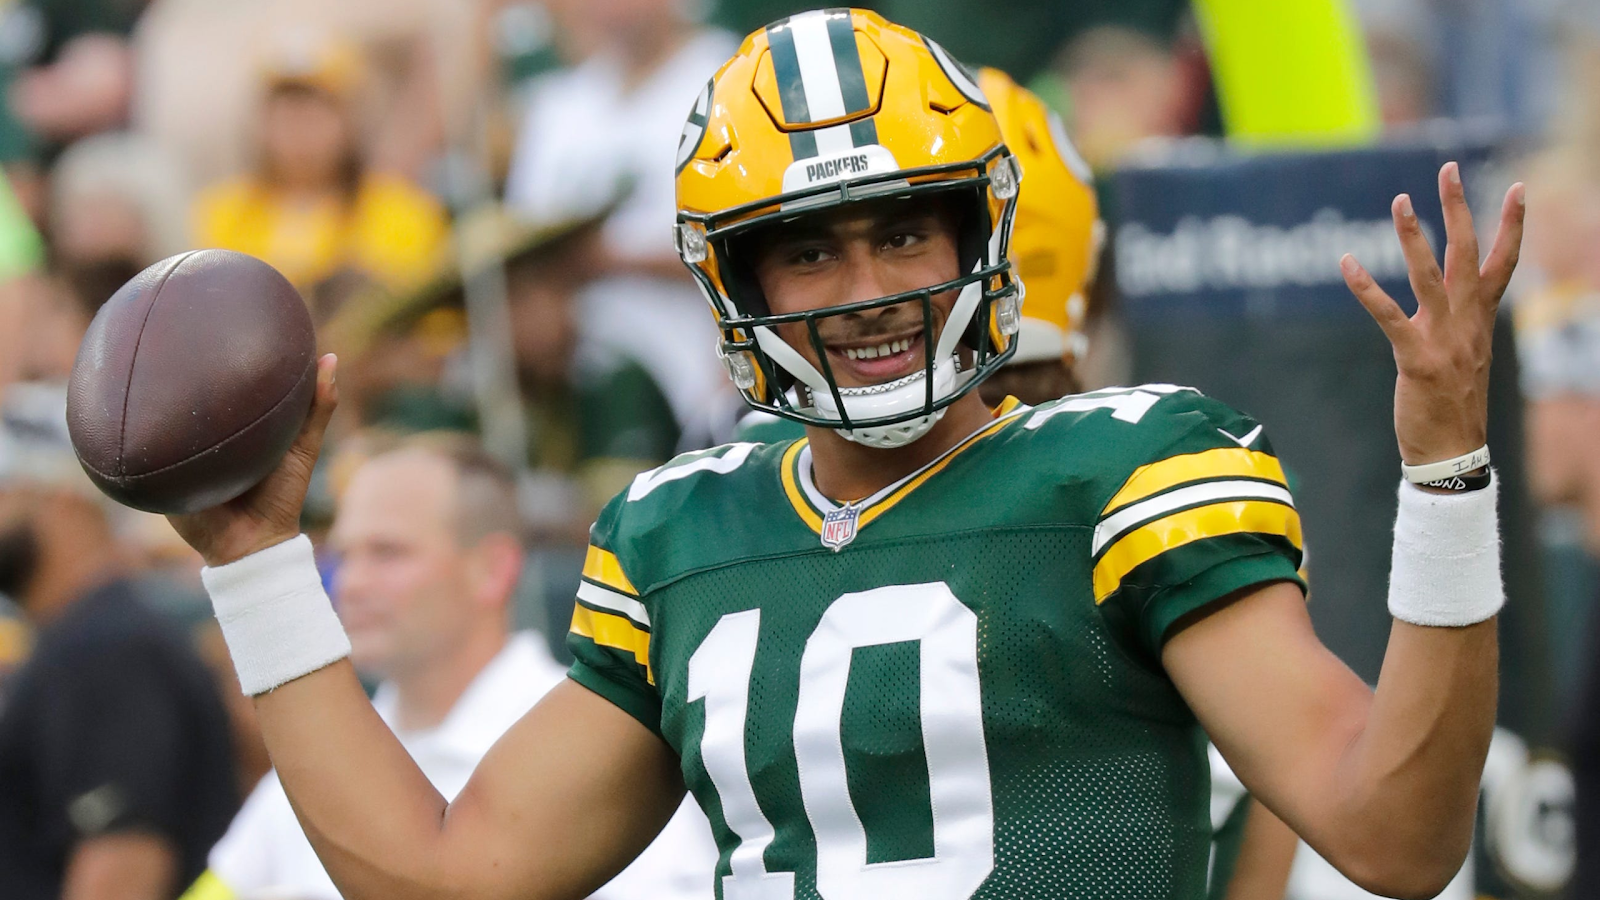 Live Updates: Packers vs. Patriots in NFL Preseason - Sports Illustrated  Green Bay Packers News, Analysis and More